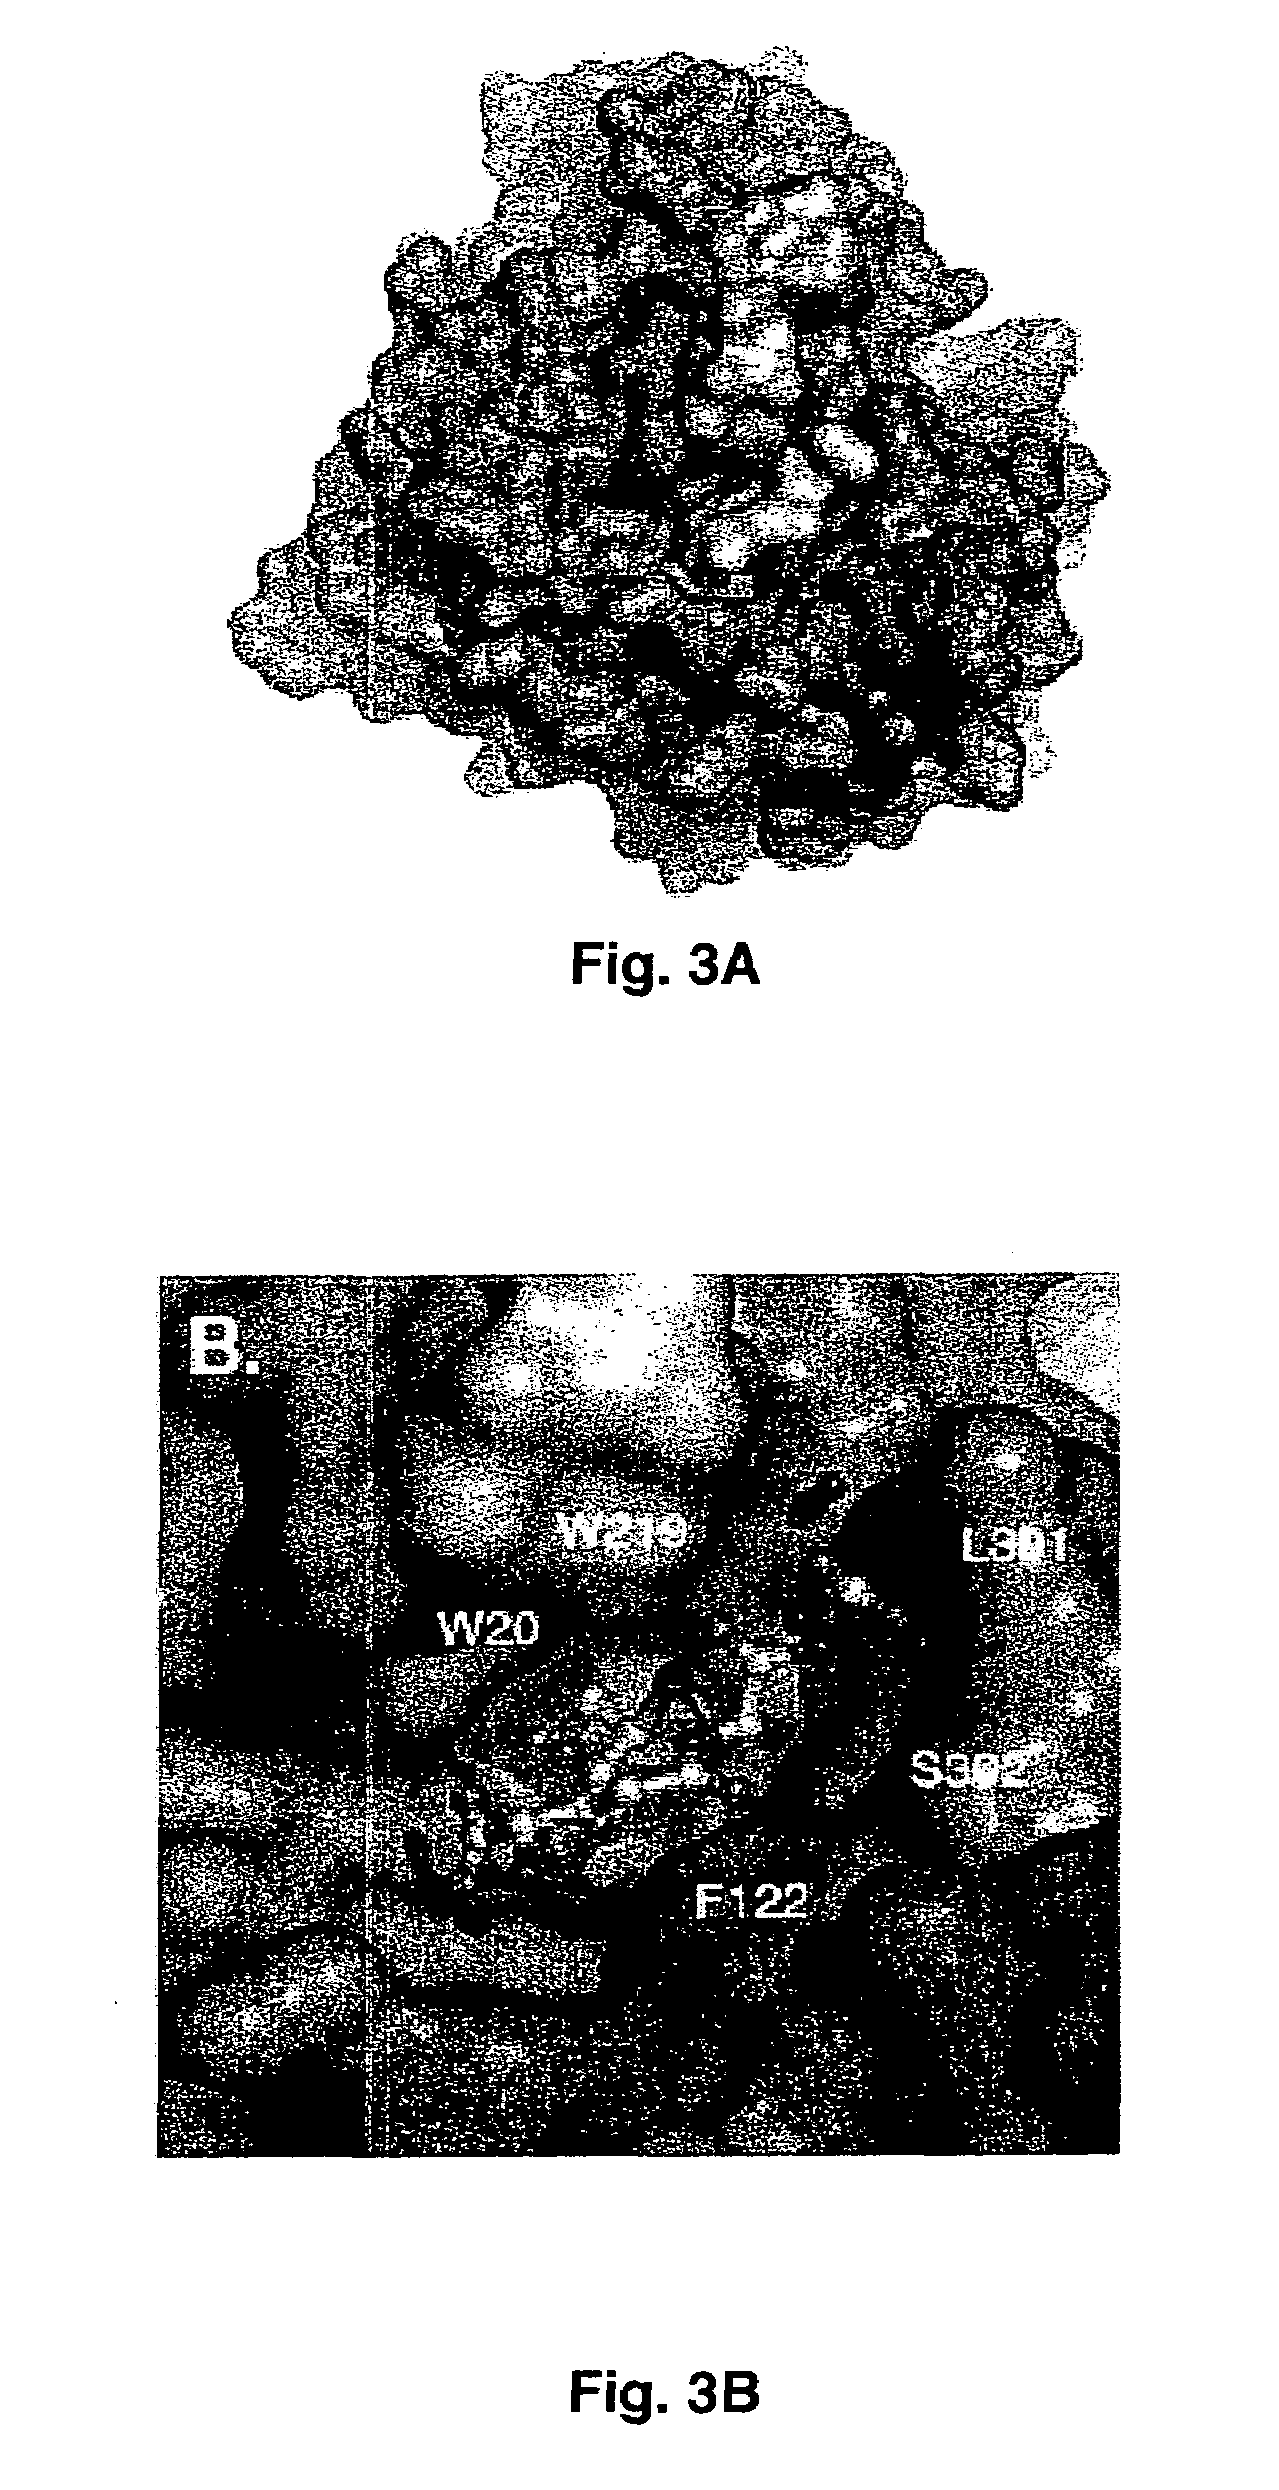 Method for designing a potential inhibitor of glutathione-aldehyde conjugate binding to aldose reductase